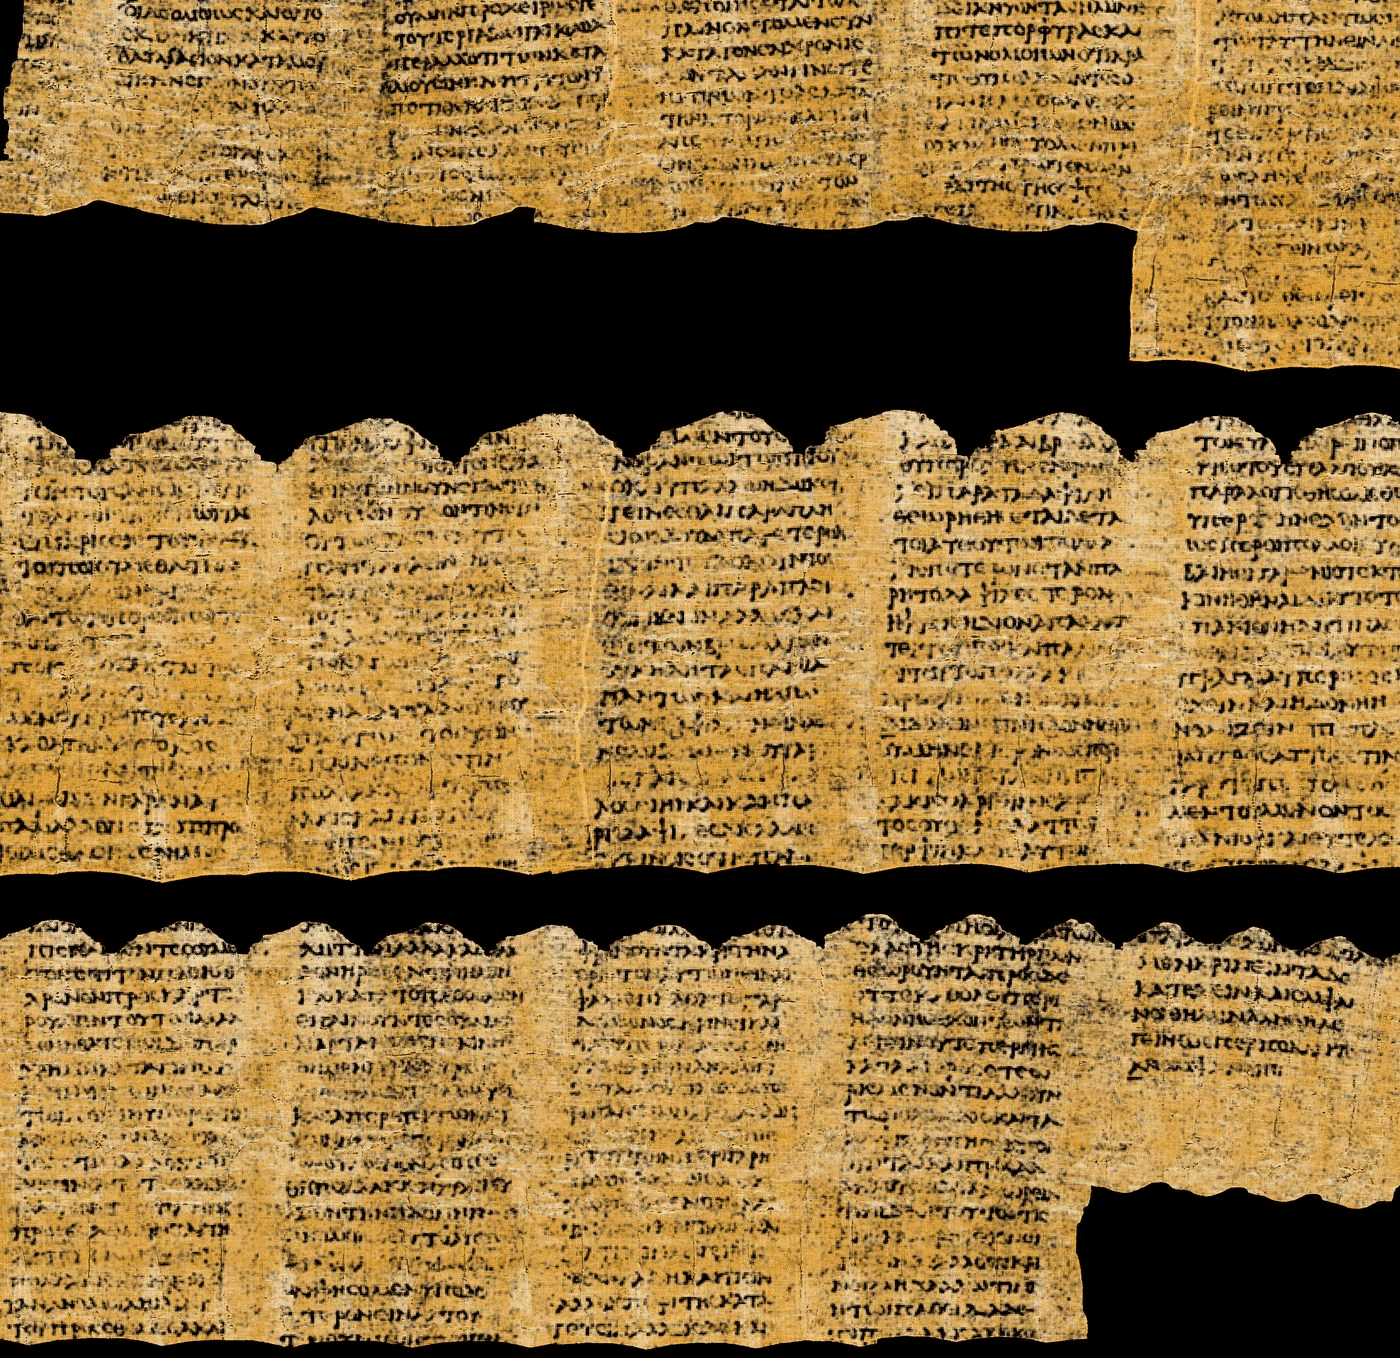 The deciphered parts from the scroll. Originally from the Vesuvius project